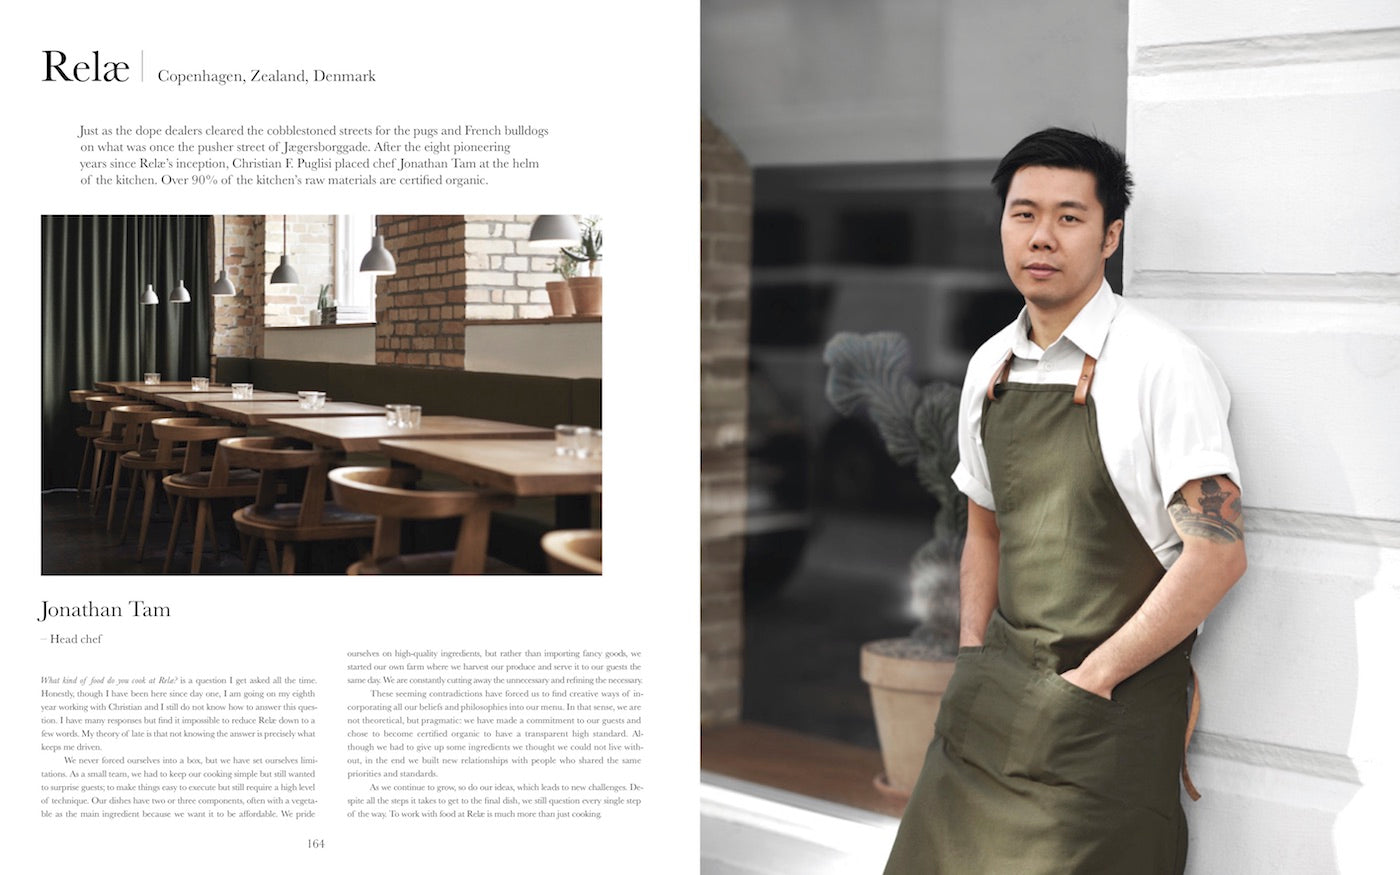 Head chef of Relæ Restaurant Jonathan Tam standing, wearing his cooking uniform and a green apron. (Photo: Michael Jepsen)